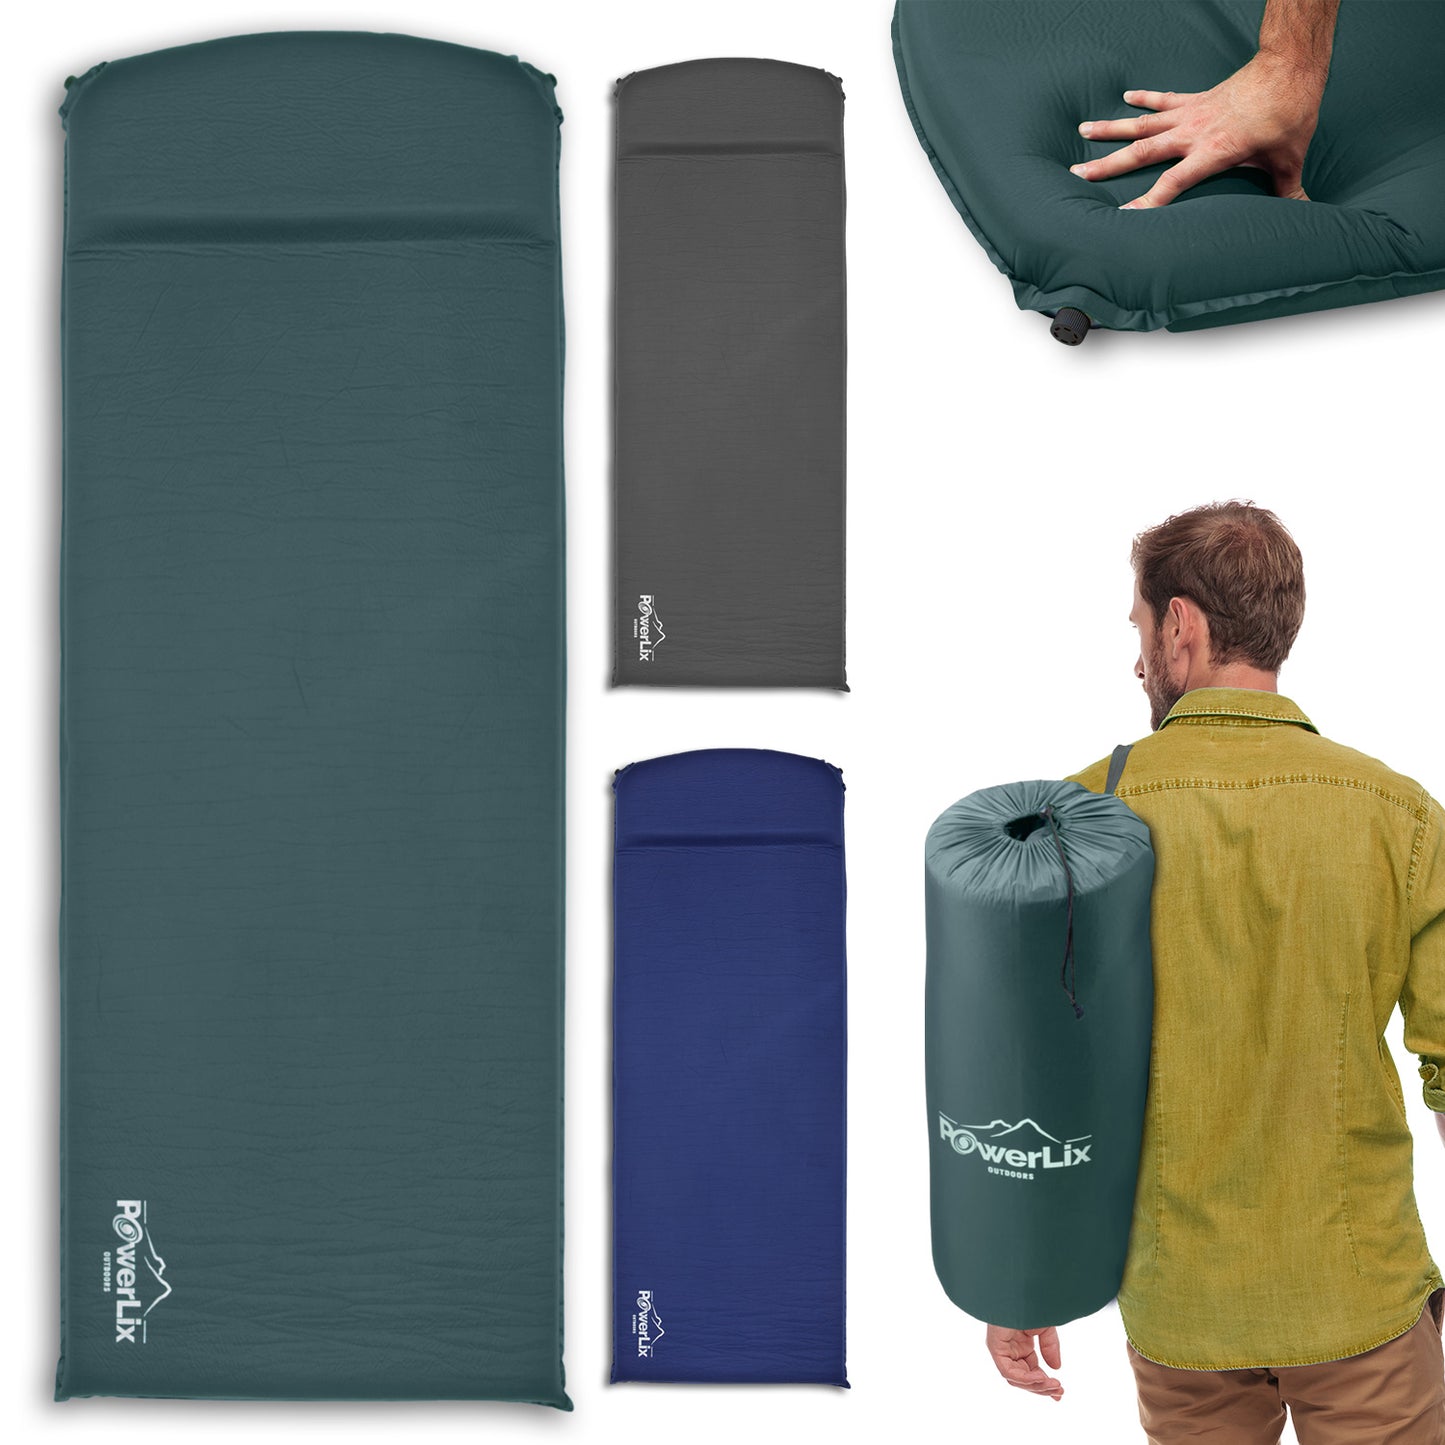 Three Powerlix Sleeping Pads with Self-Inflating Foam Pads displayed in green, gray, and blue. A model shwoign one stored in its bad and hung over his shoulder. Another is shown being pressed on by a hand to demonstrate softness.